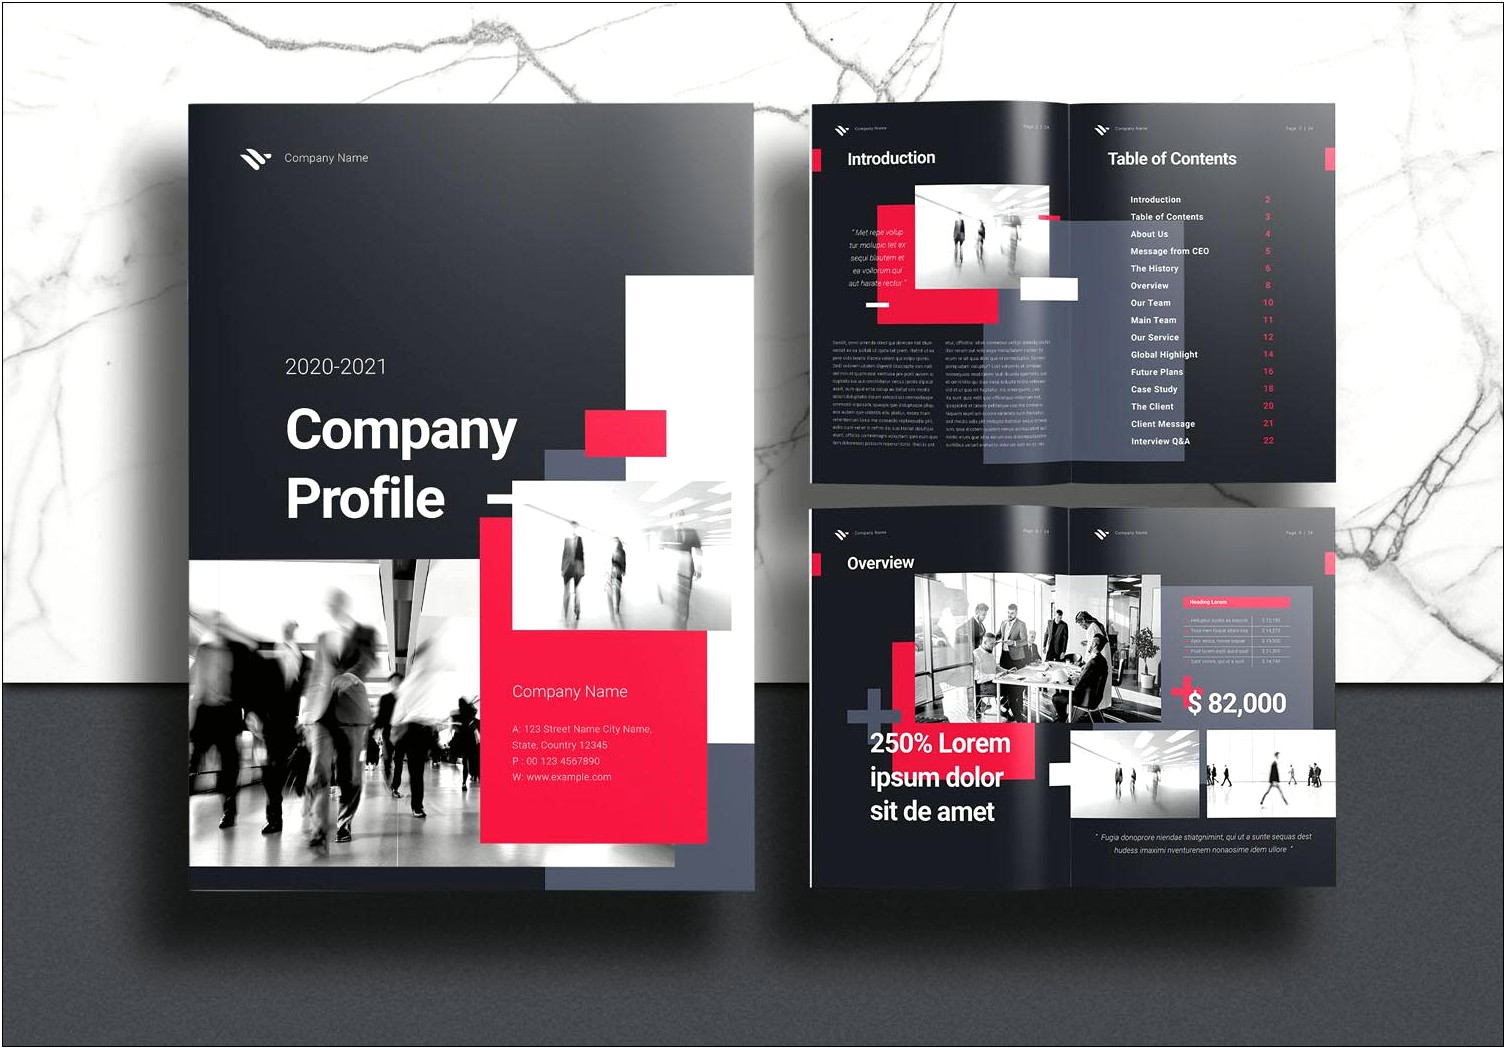 Company Profile Indesign Template Free Download